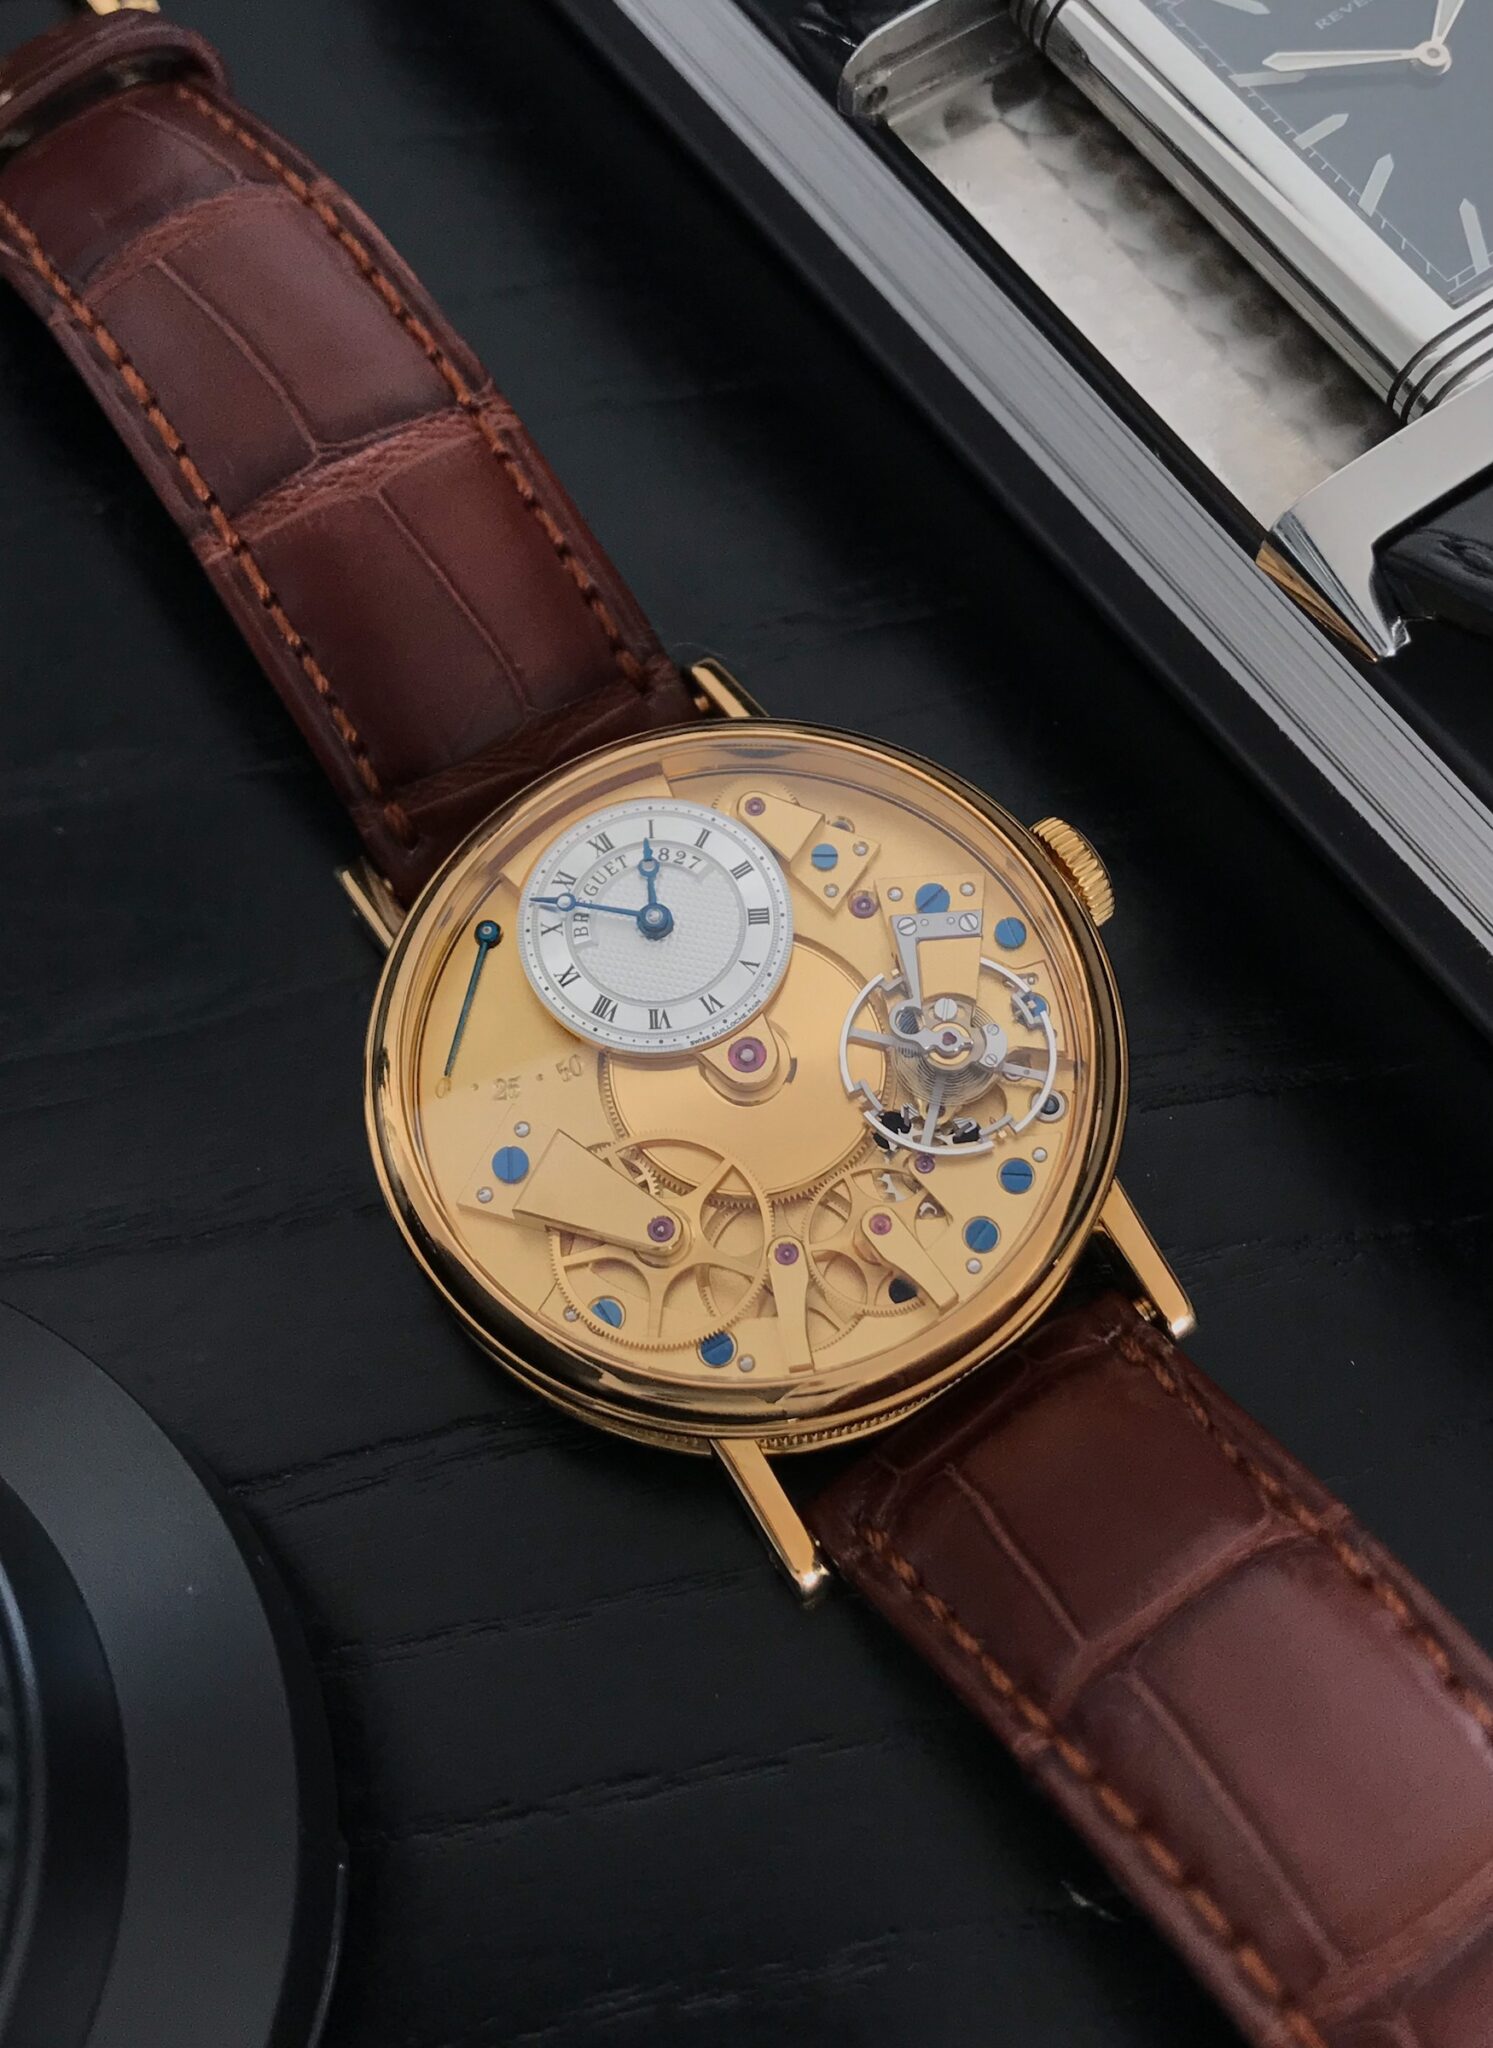 Breguet 7027 Owner Review by @ikarlwatches